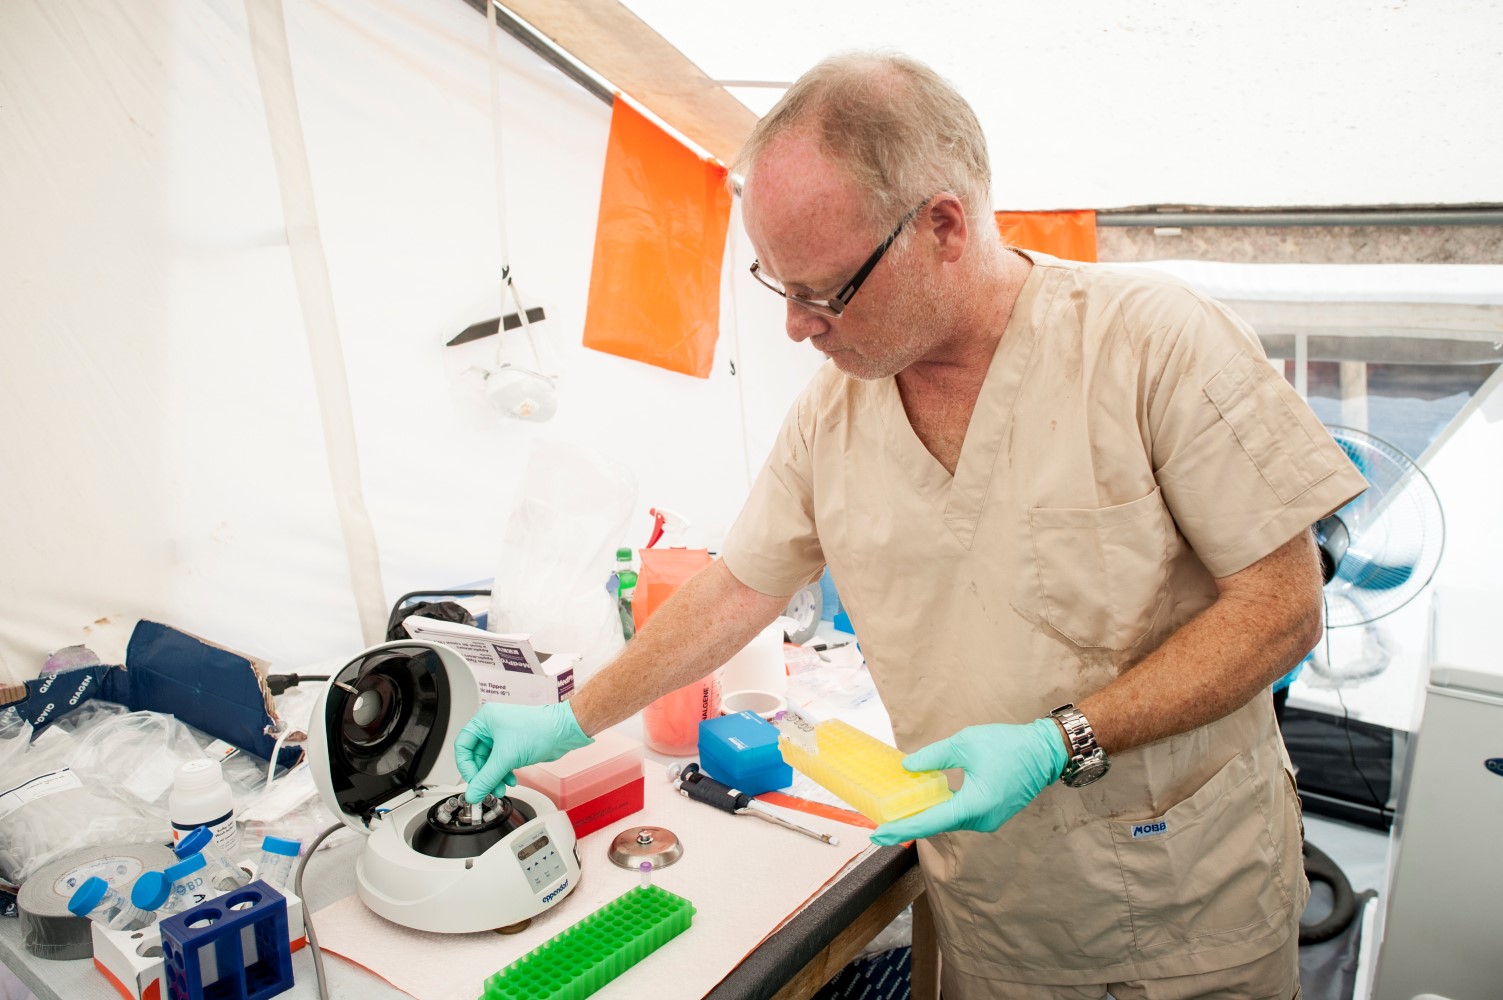 Allen Grolla running on-site laboratory tests during the Ebola virus disease outbreak in West Africa